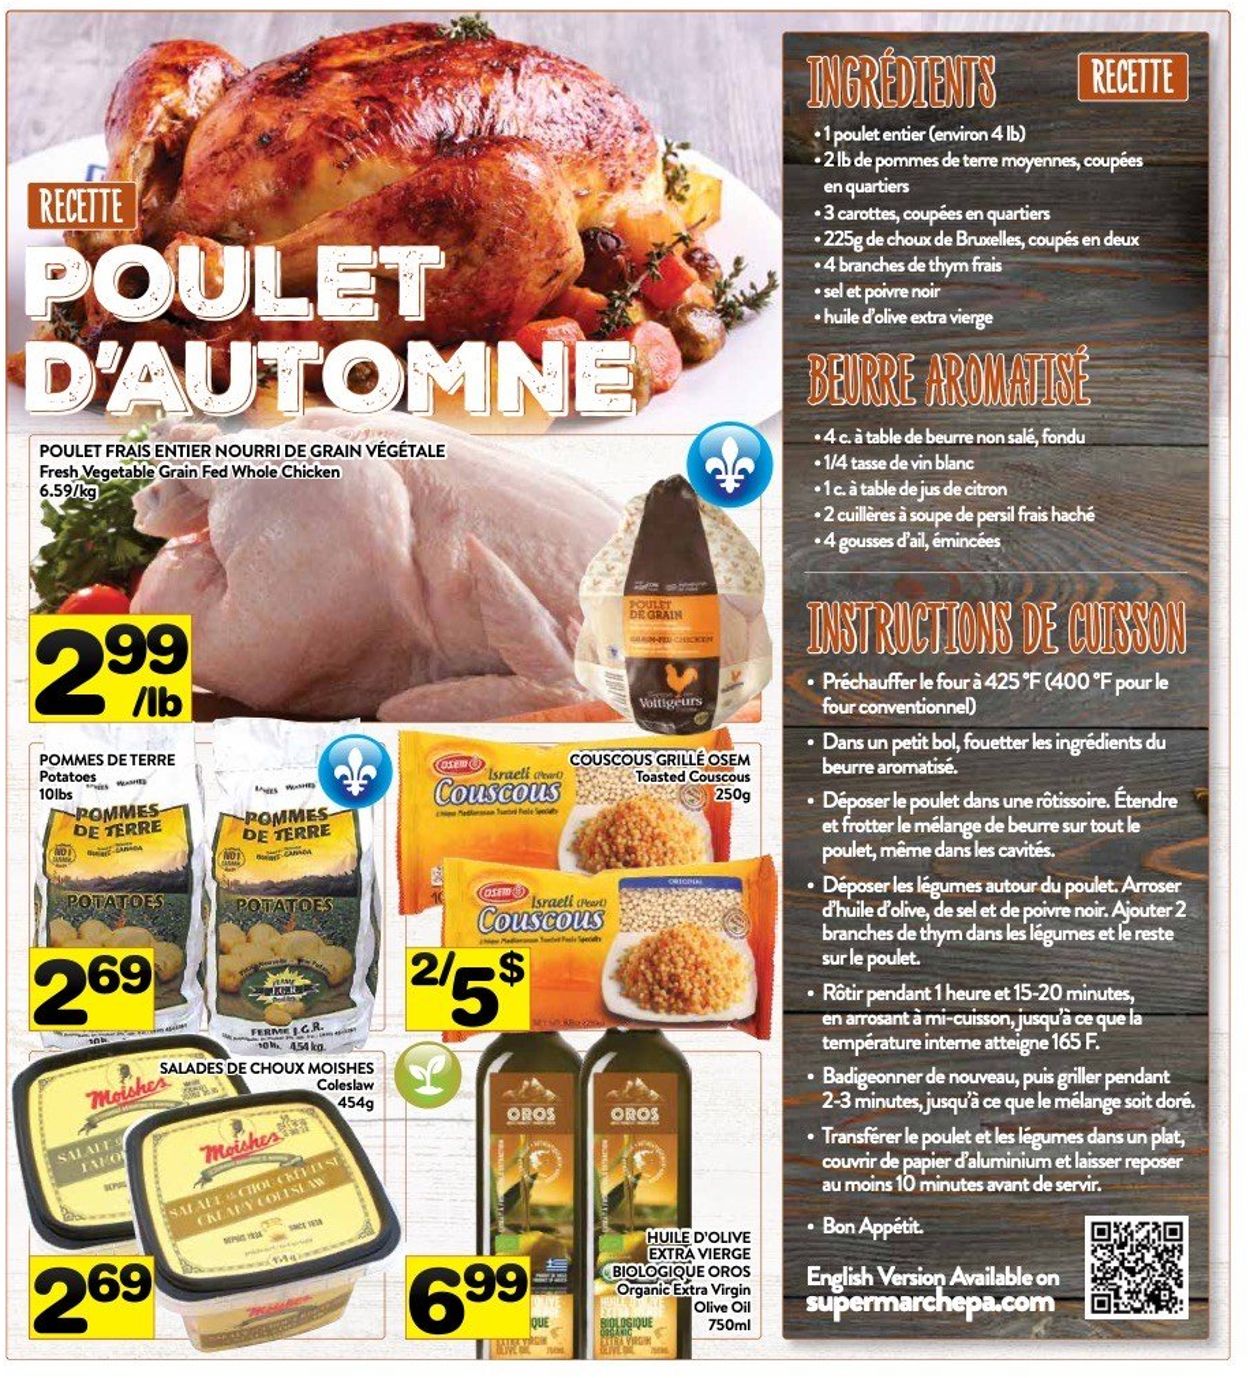 PA Supermarché Flyer from 11/29/2021